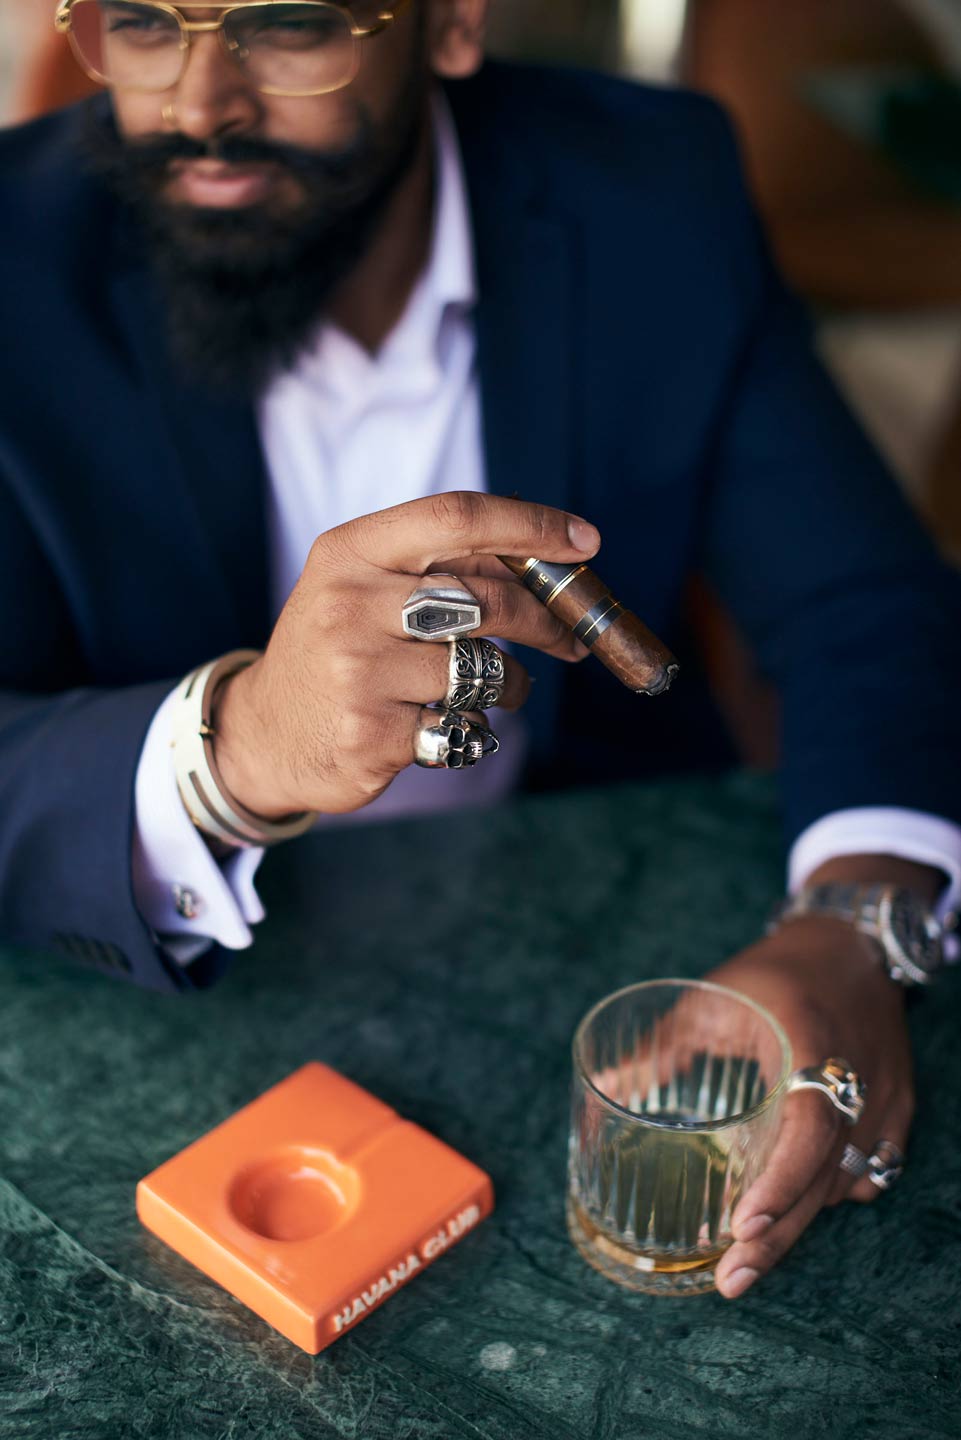 Lifestyle photography of man holding cigar and drinking whisky